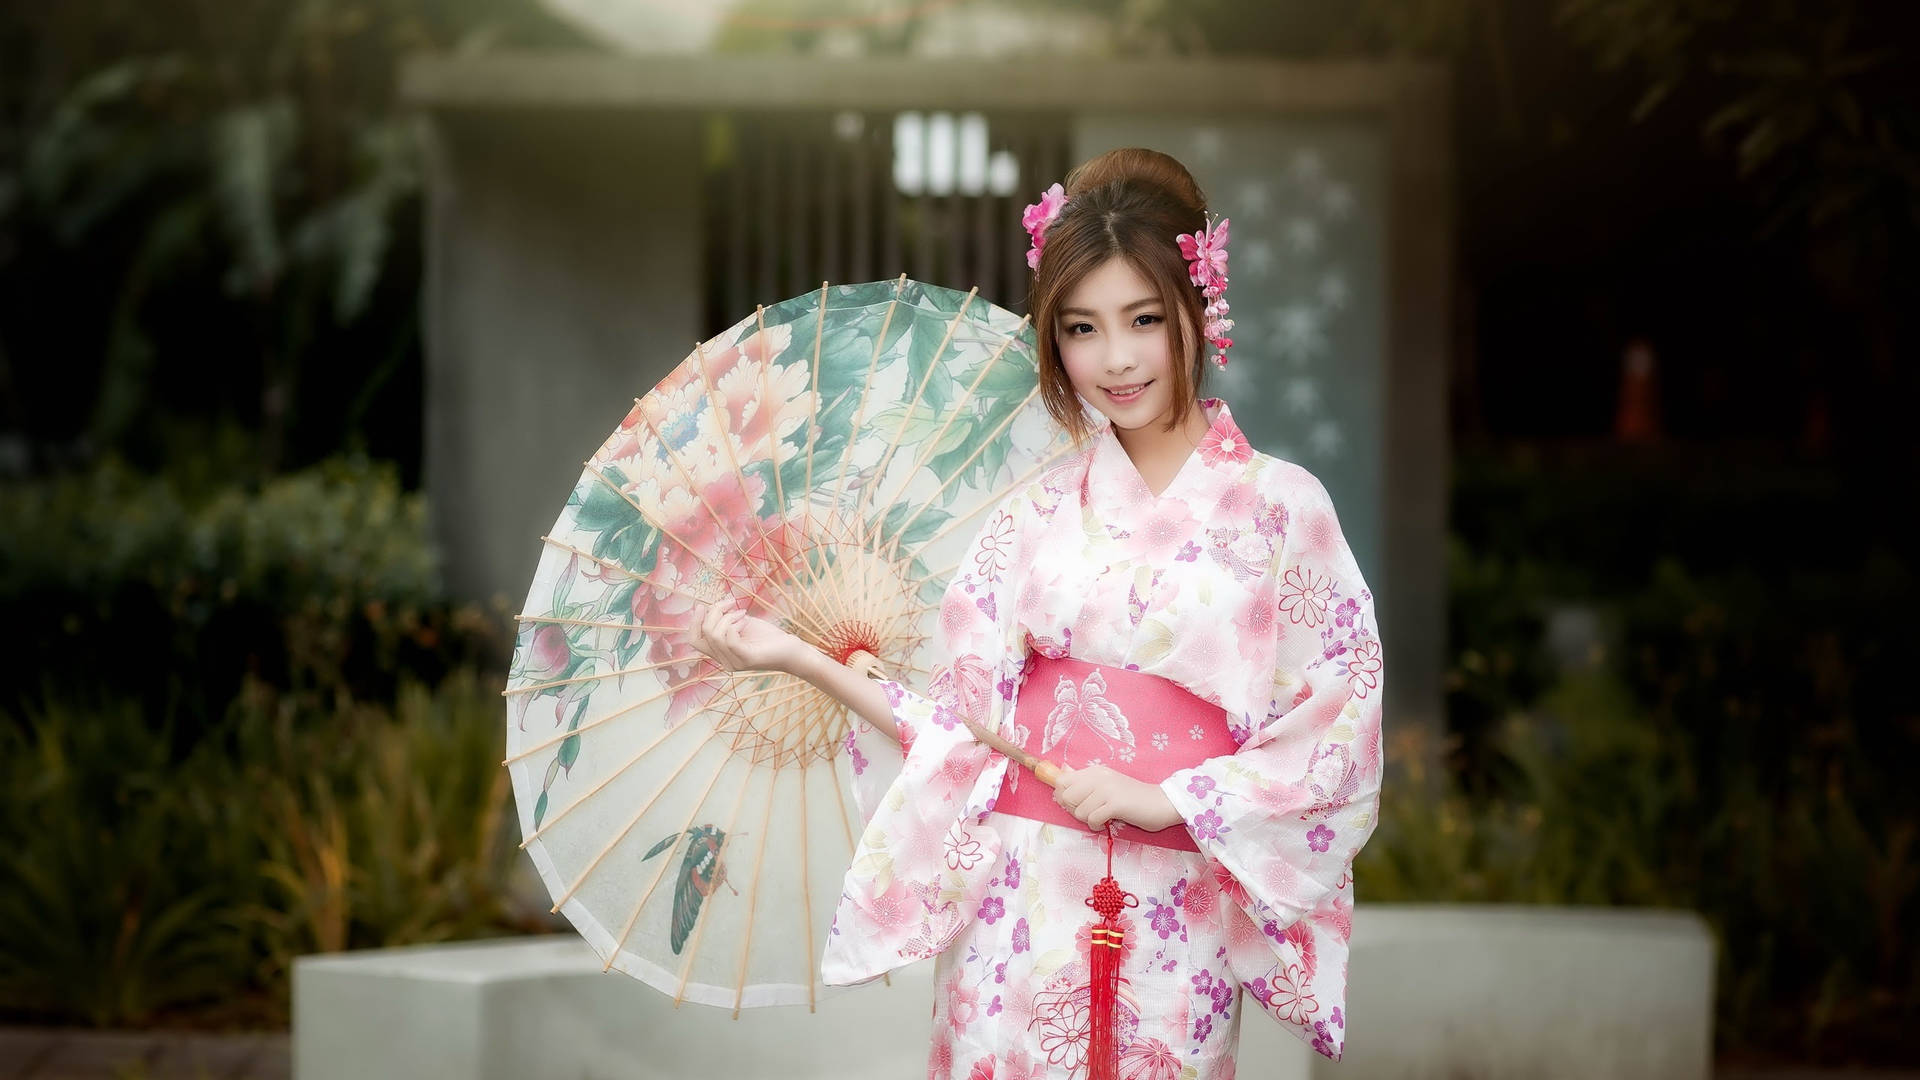 Japanese Girl With Floral Parasol Background